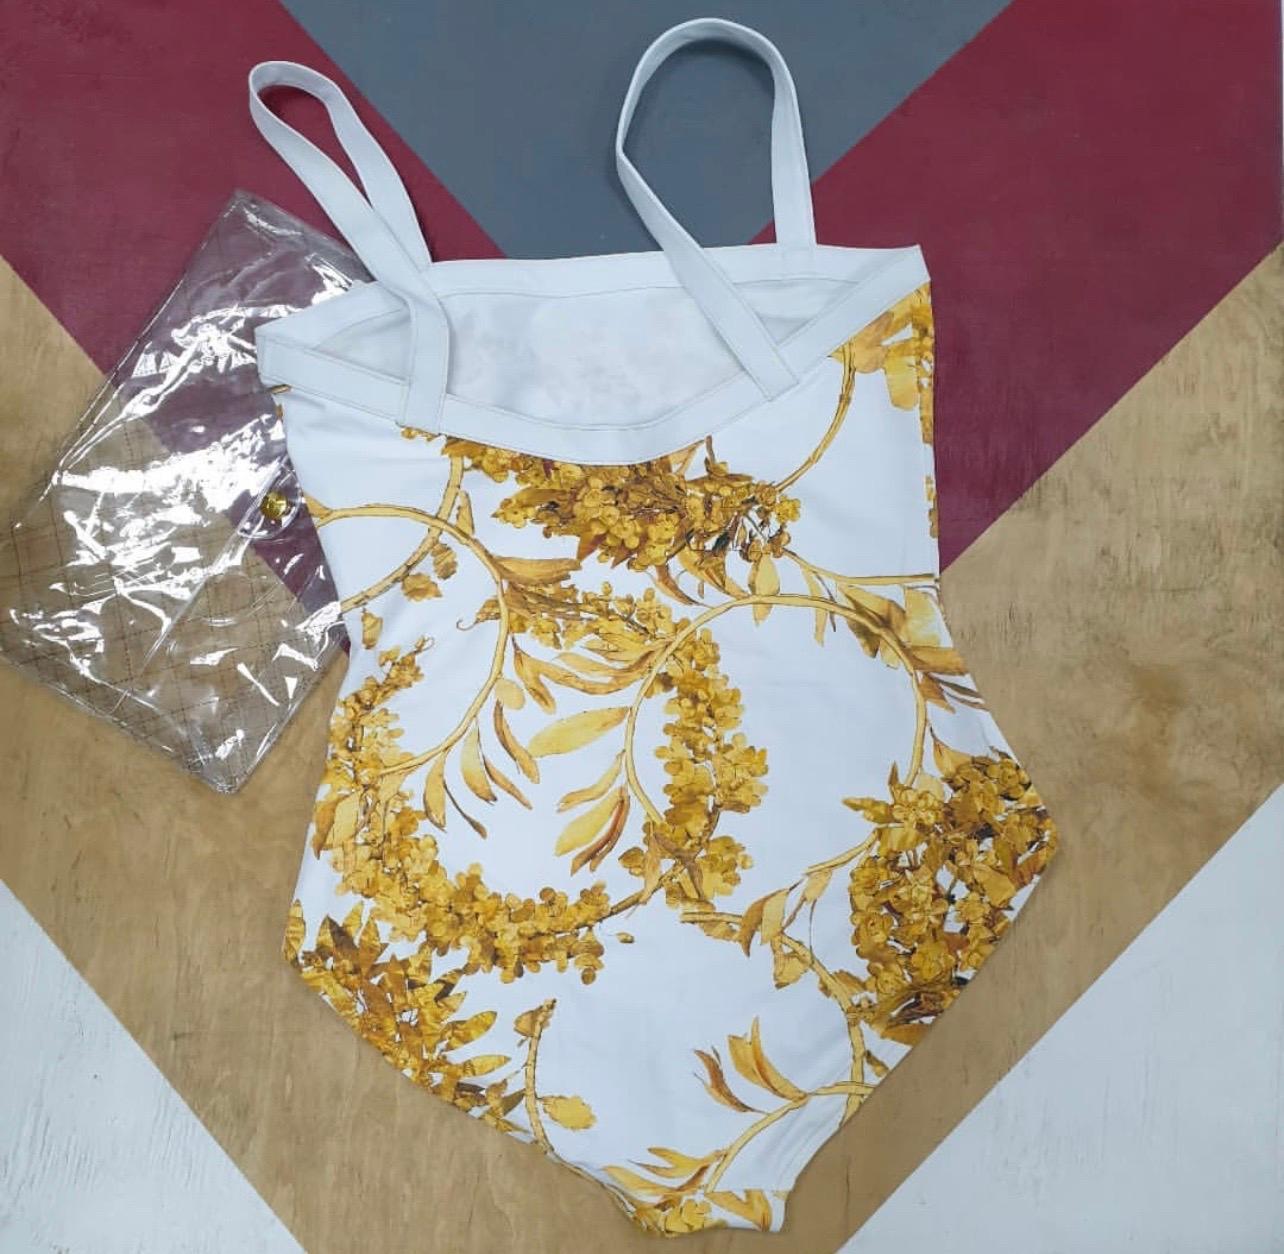 1-piece swimsuit from Cruis Resort 2018.
Sz.38.
Never worn. No paper tags.